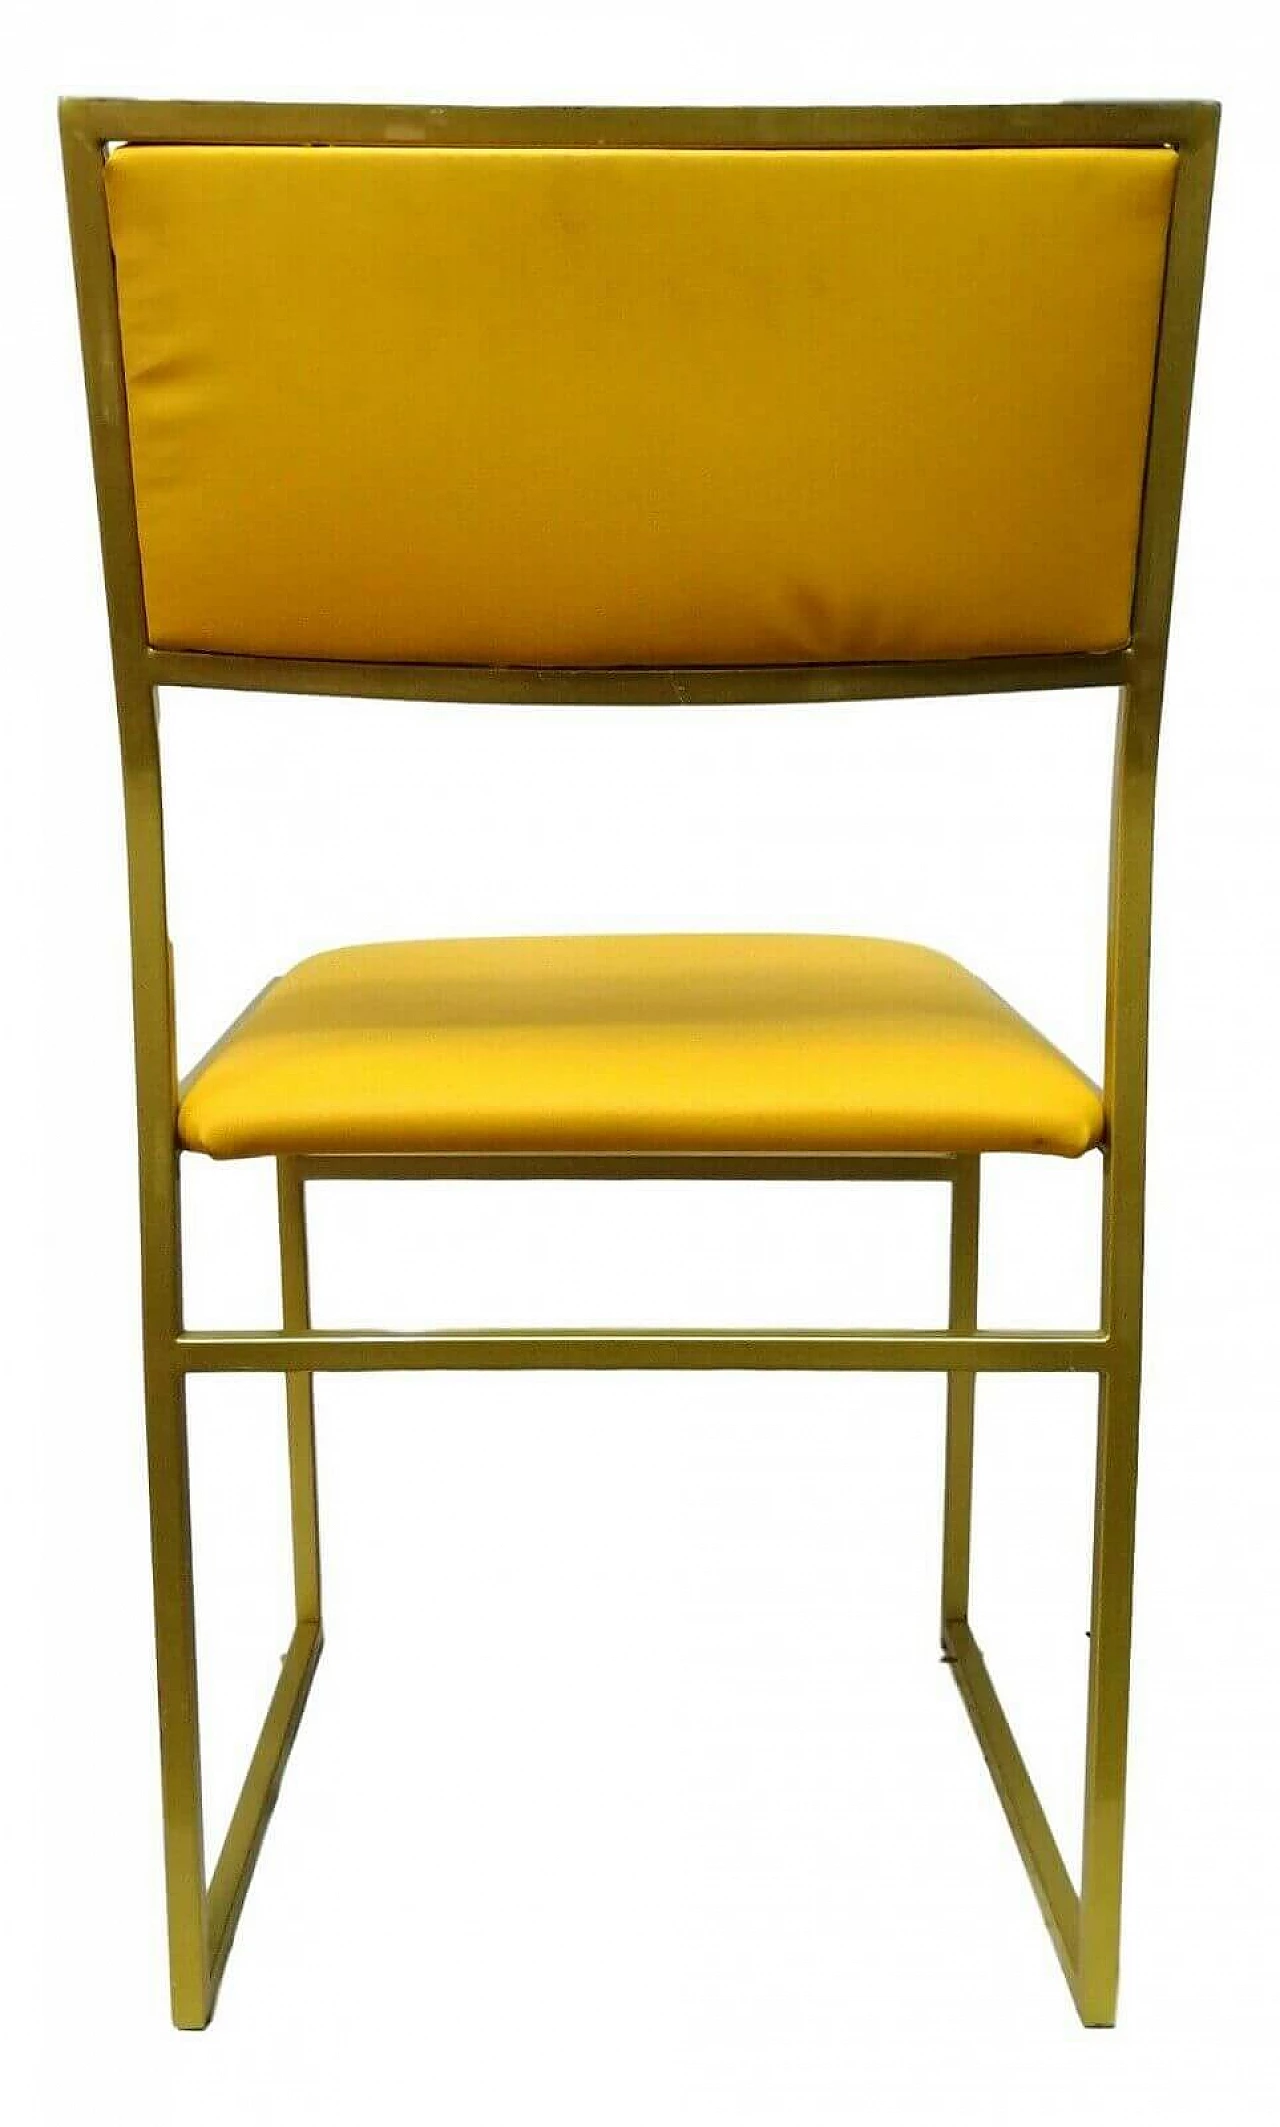 Metal chair and seat yellow, 70s 1166240